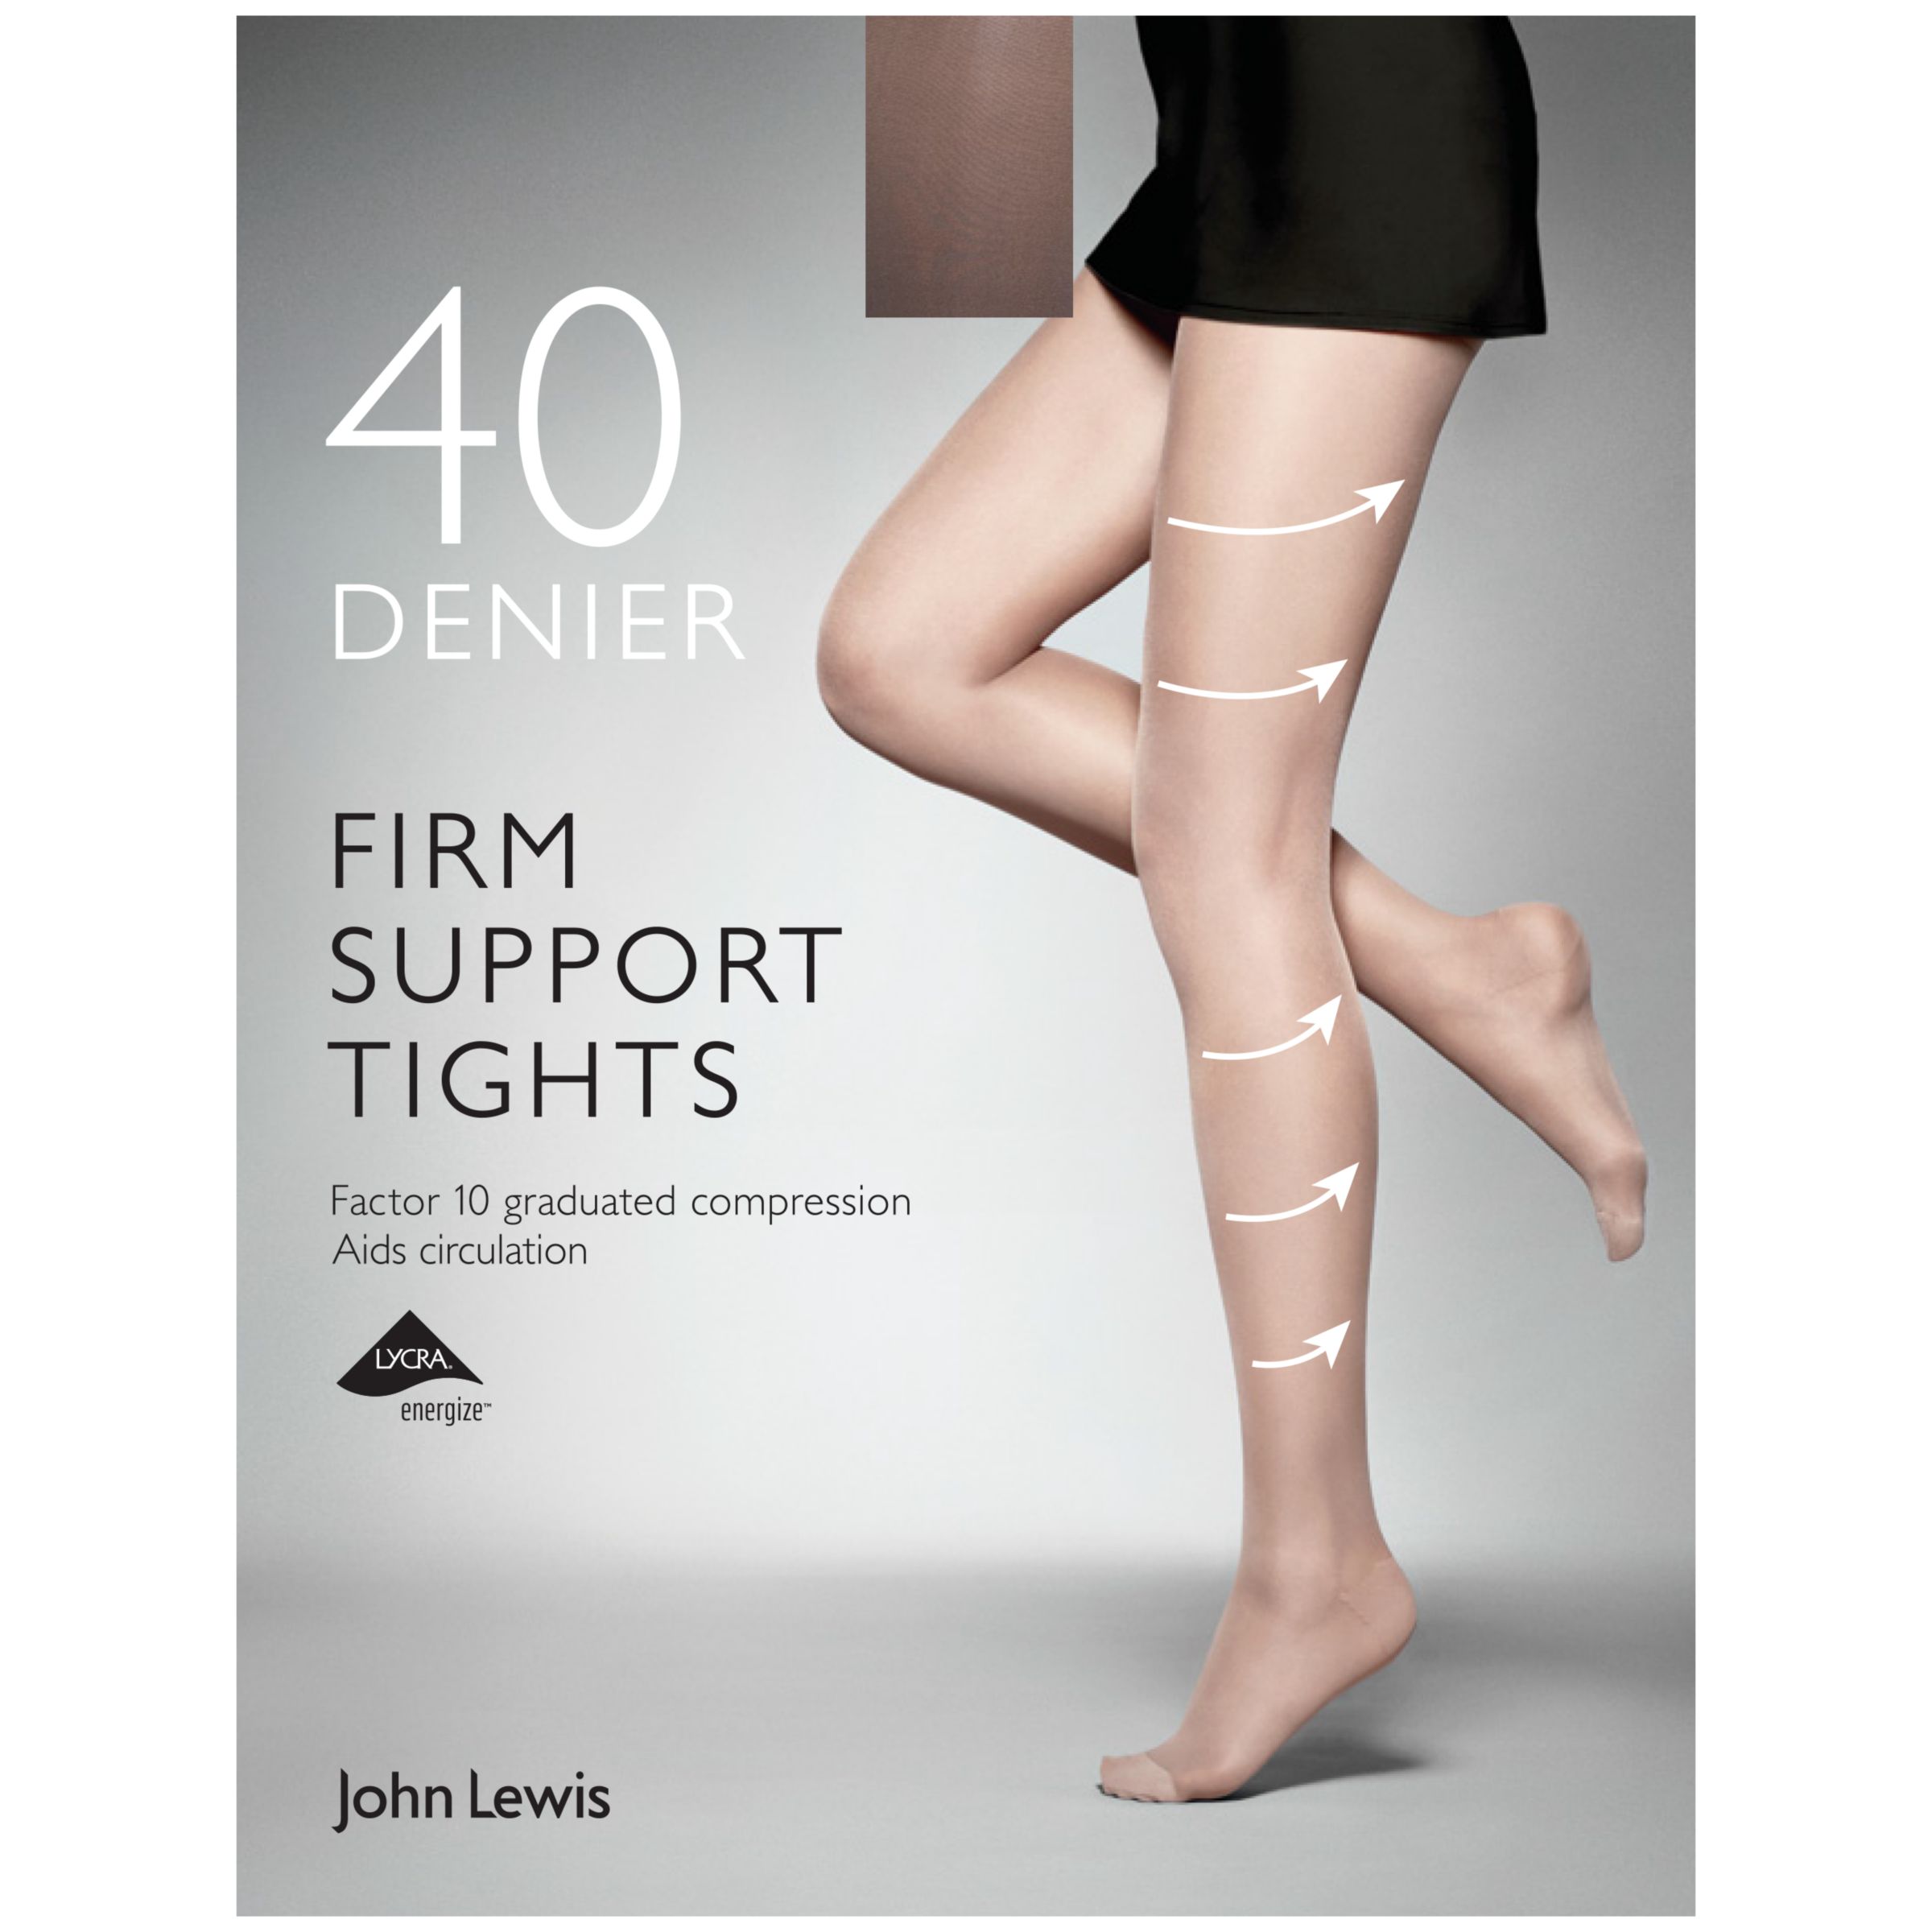 John Lewis 40 Denier Firm Support Tights, Nearly Black, L